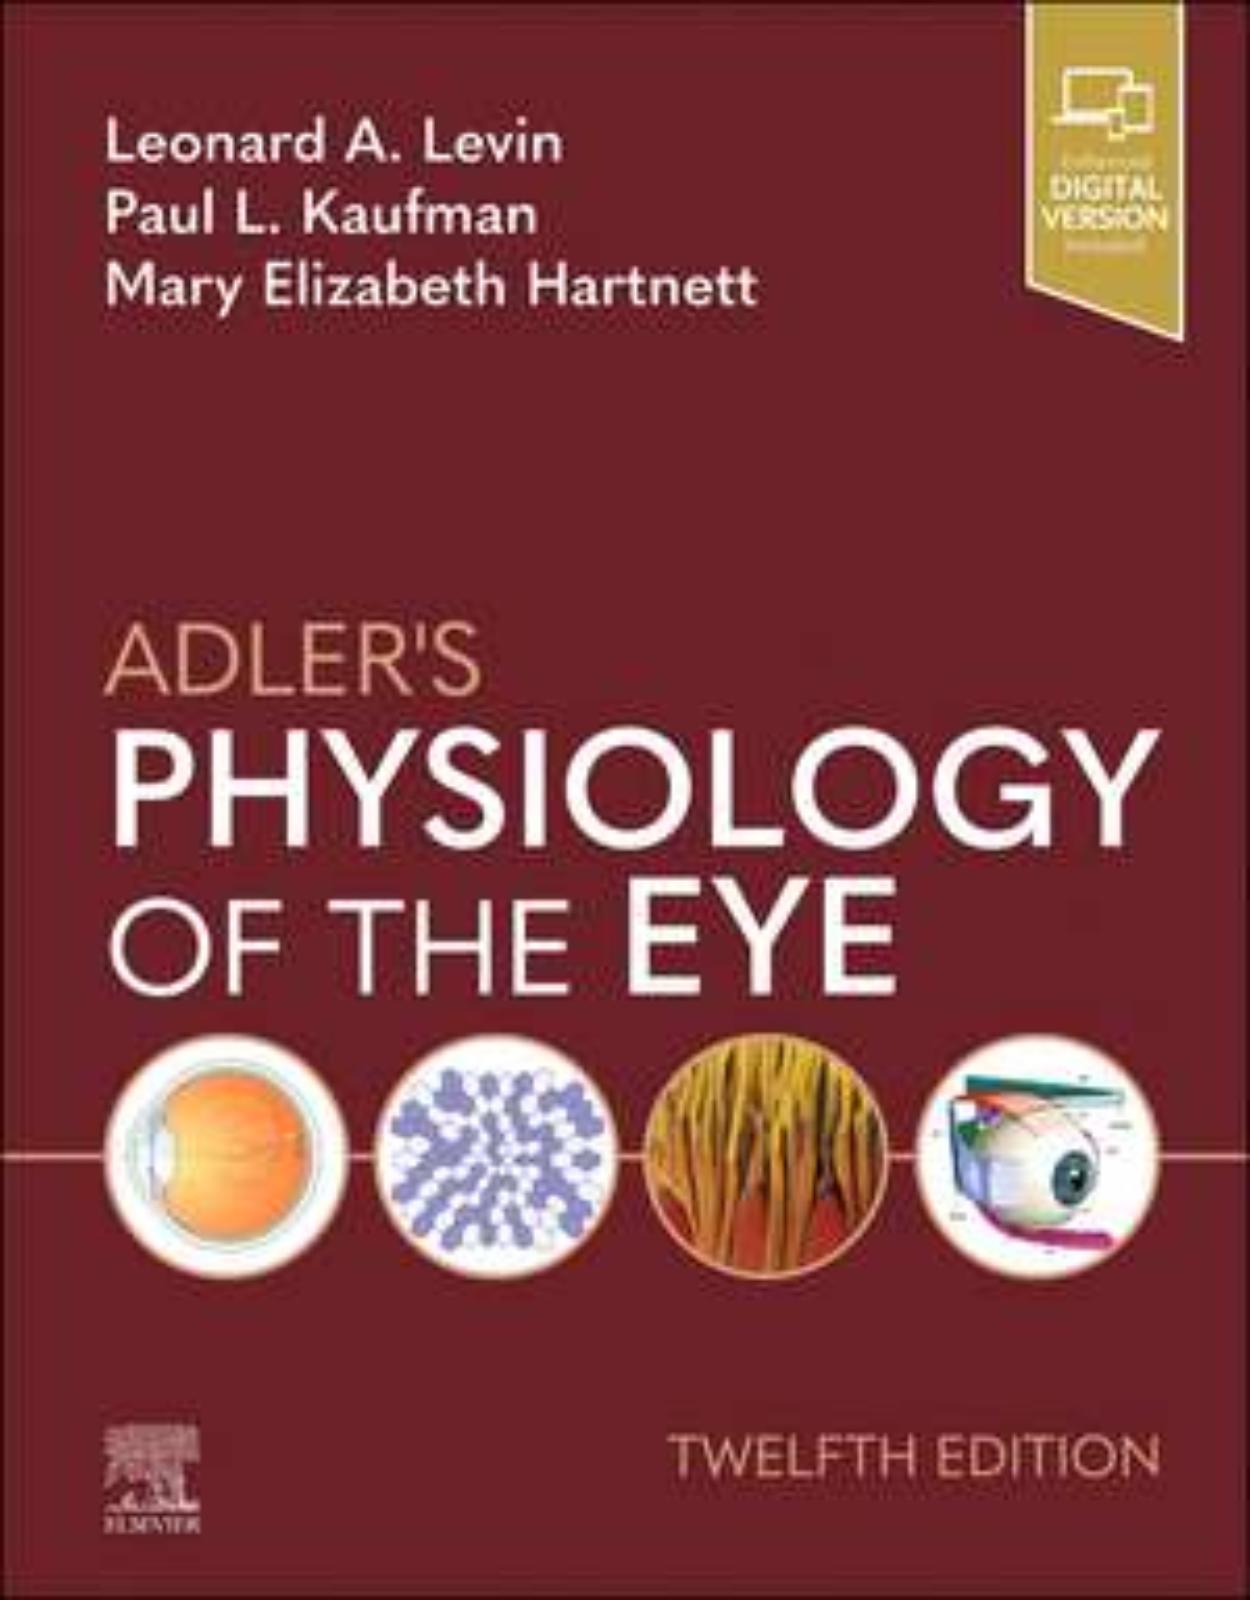 Adlers Physiology of the Eye, 12th Edition